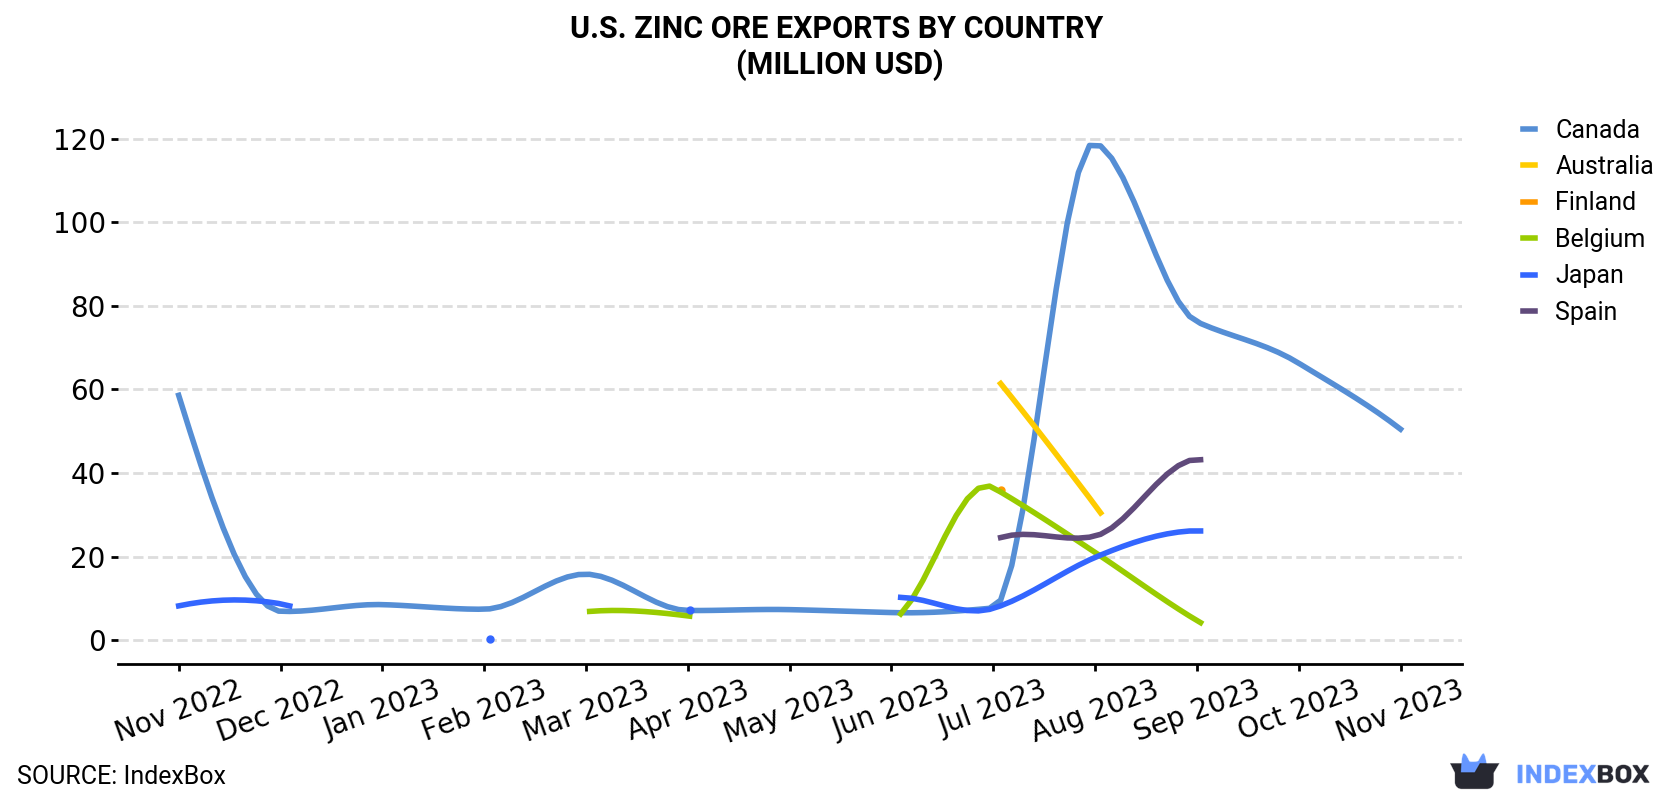 U.S. Zinc Ore Exports By Country (Million USD)